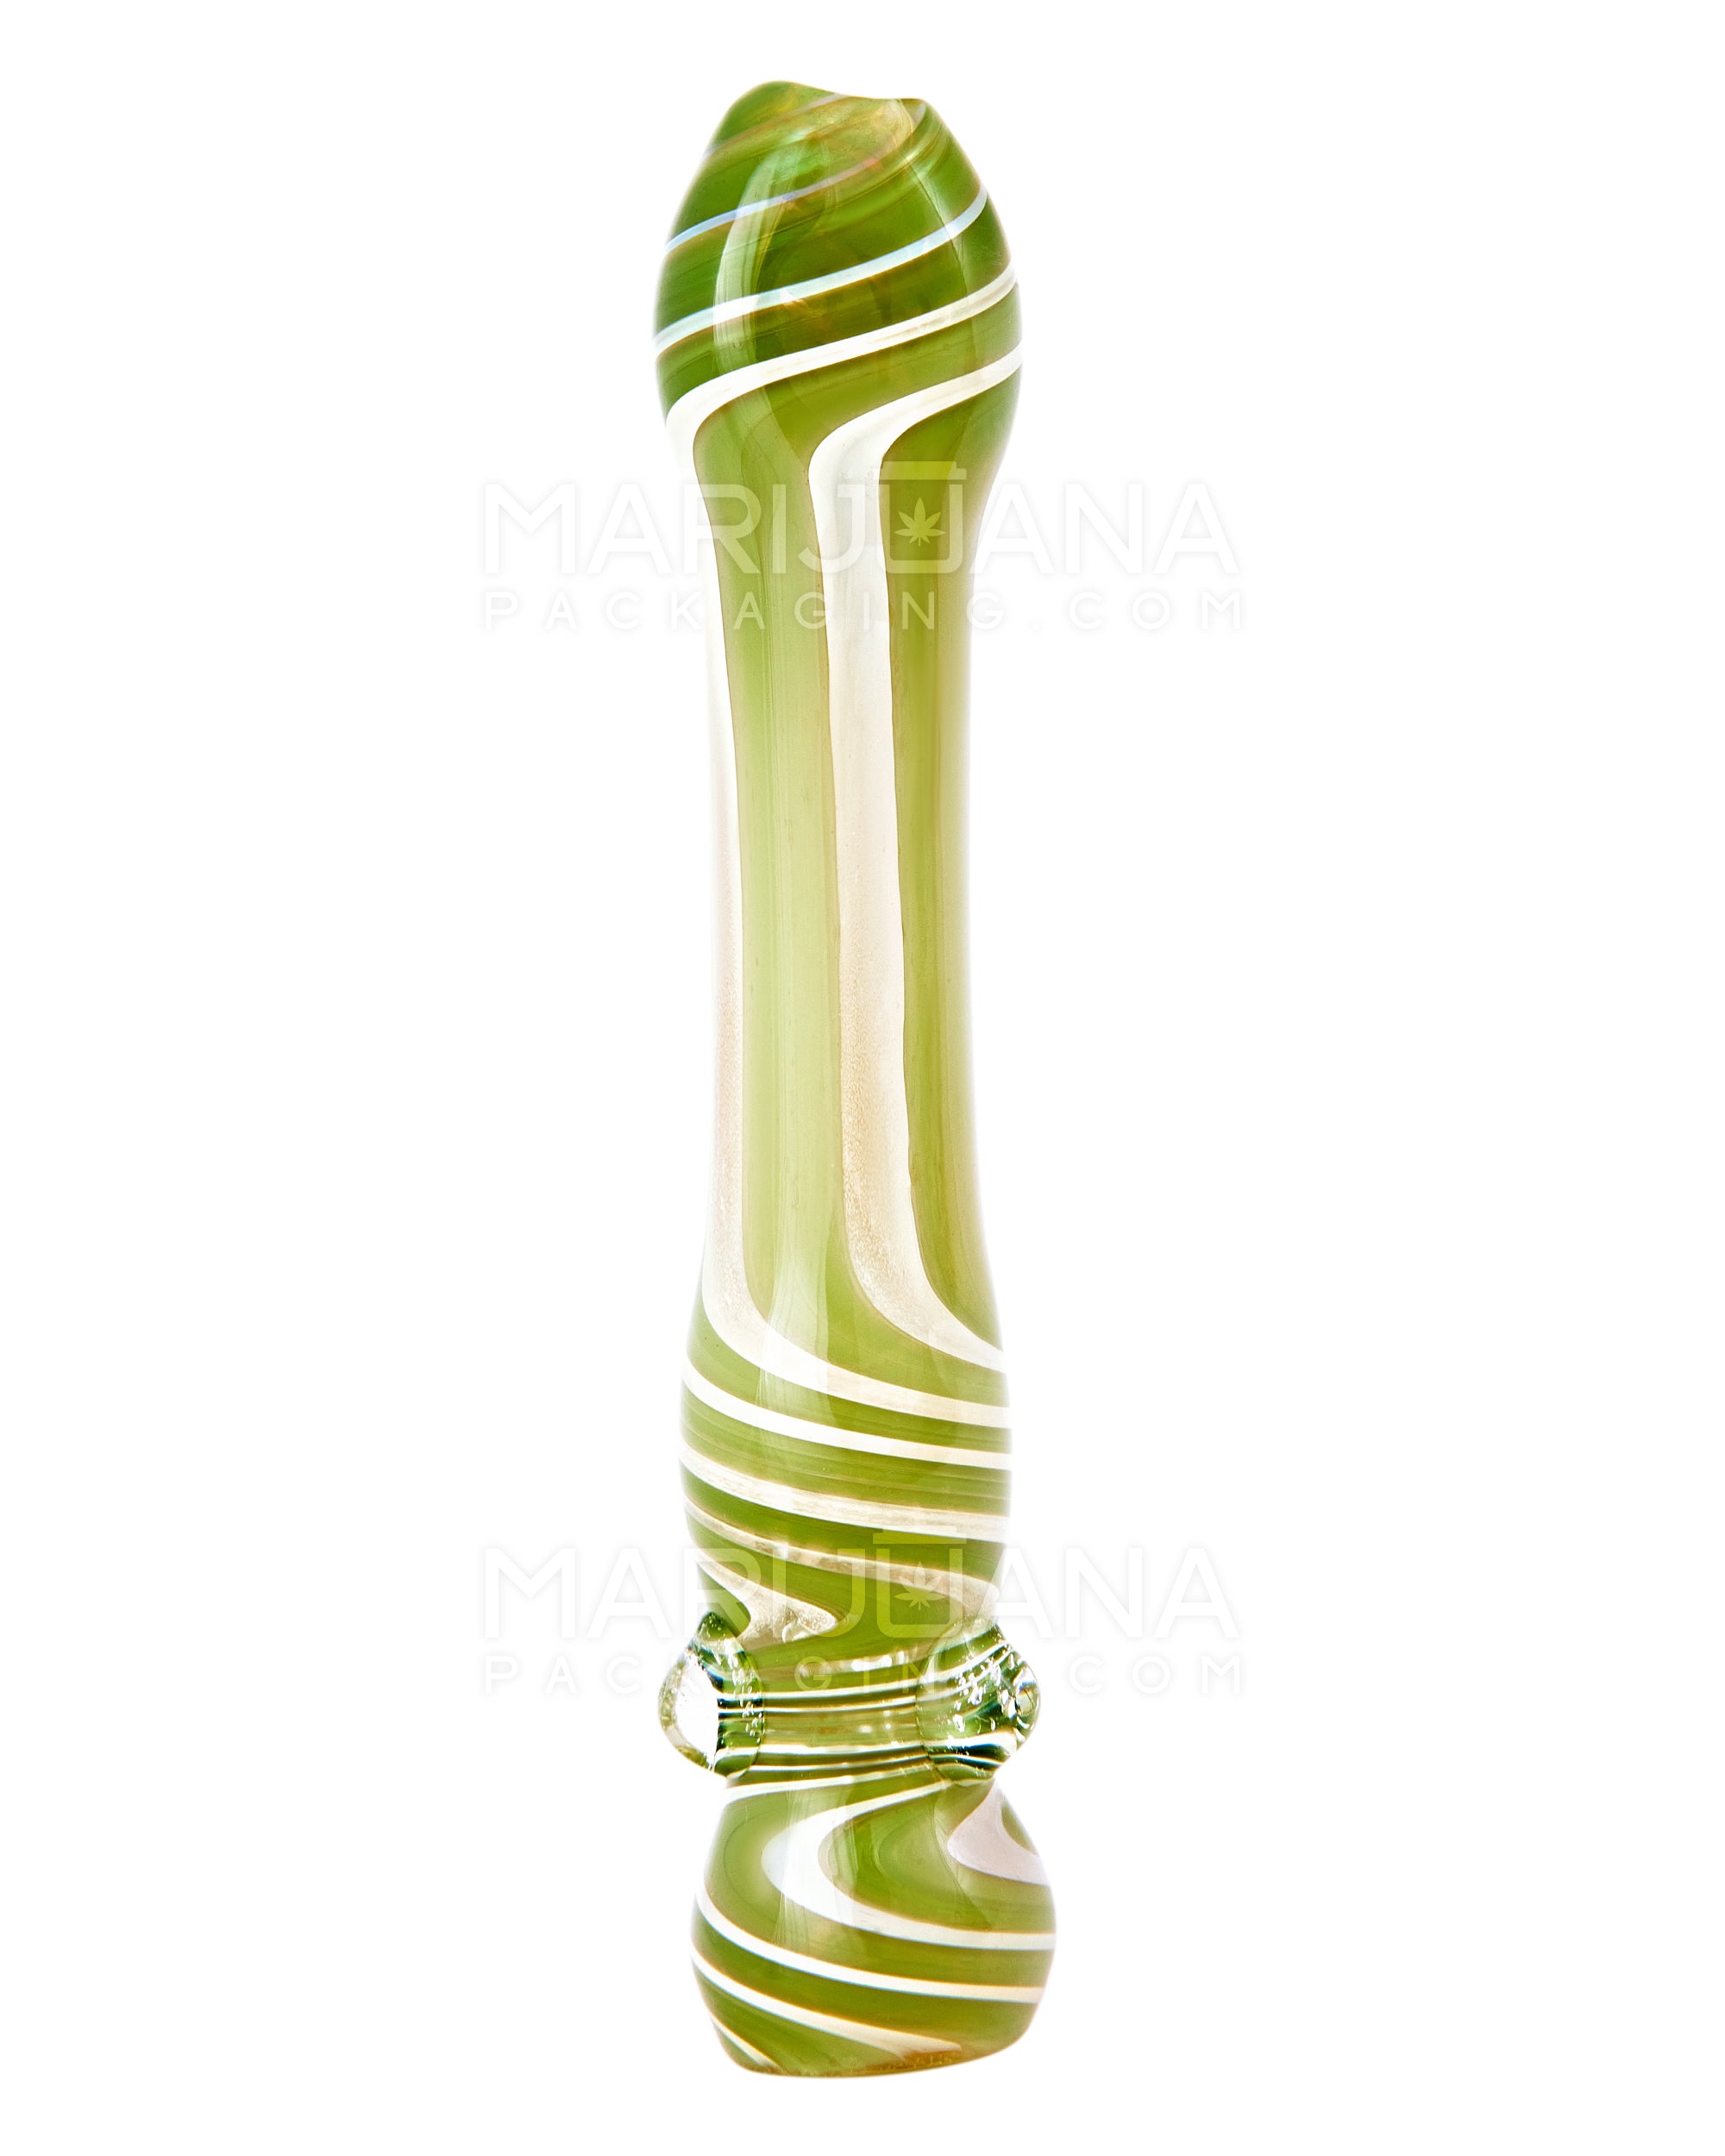 USA Glass | Swirl & Gold Fumed Chillum Hand Pipe w/ Triple Knockers | 3.5in Long - Glass - Assorted - 6